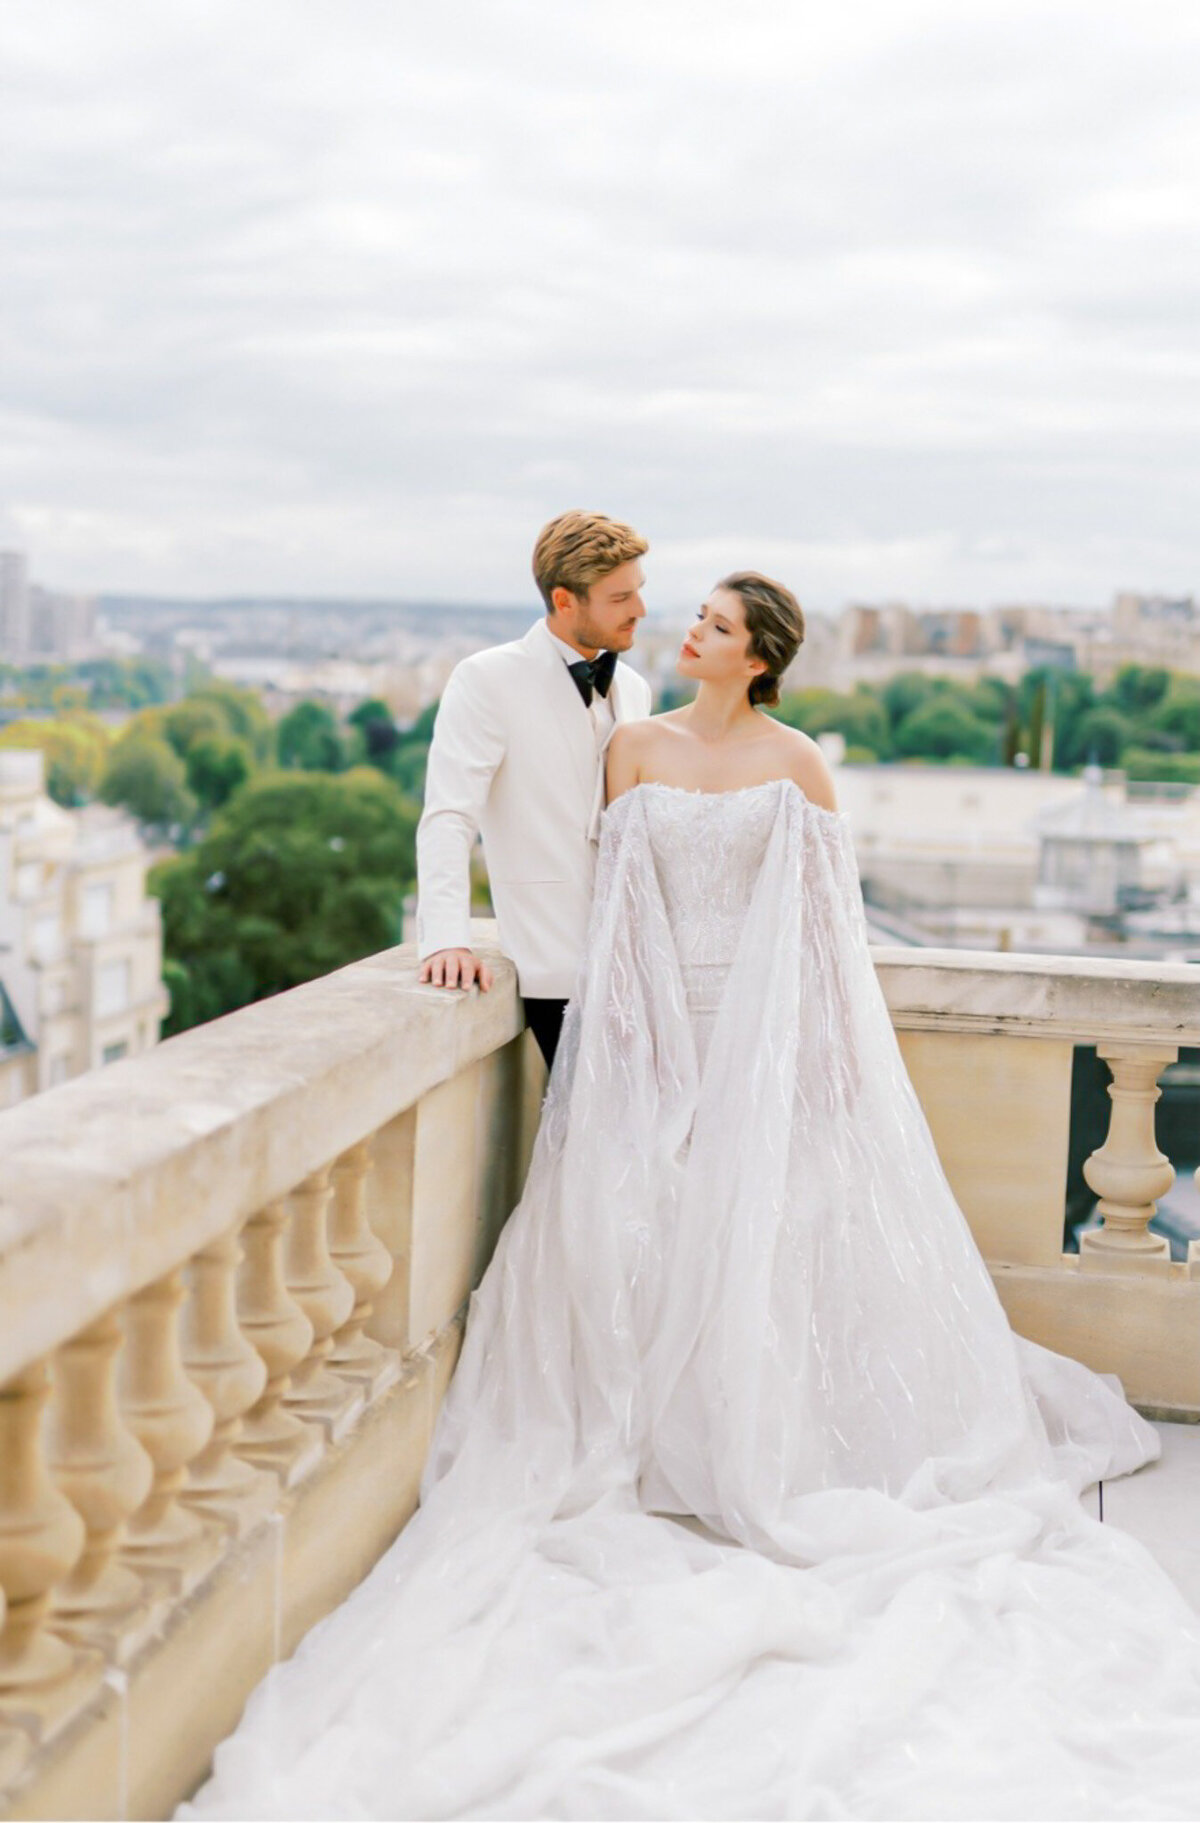 Rooftop wedding in Paris with eiffel tower view (4)